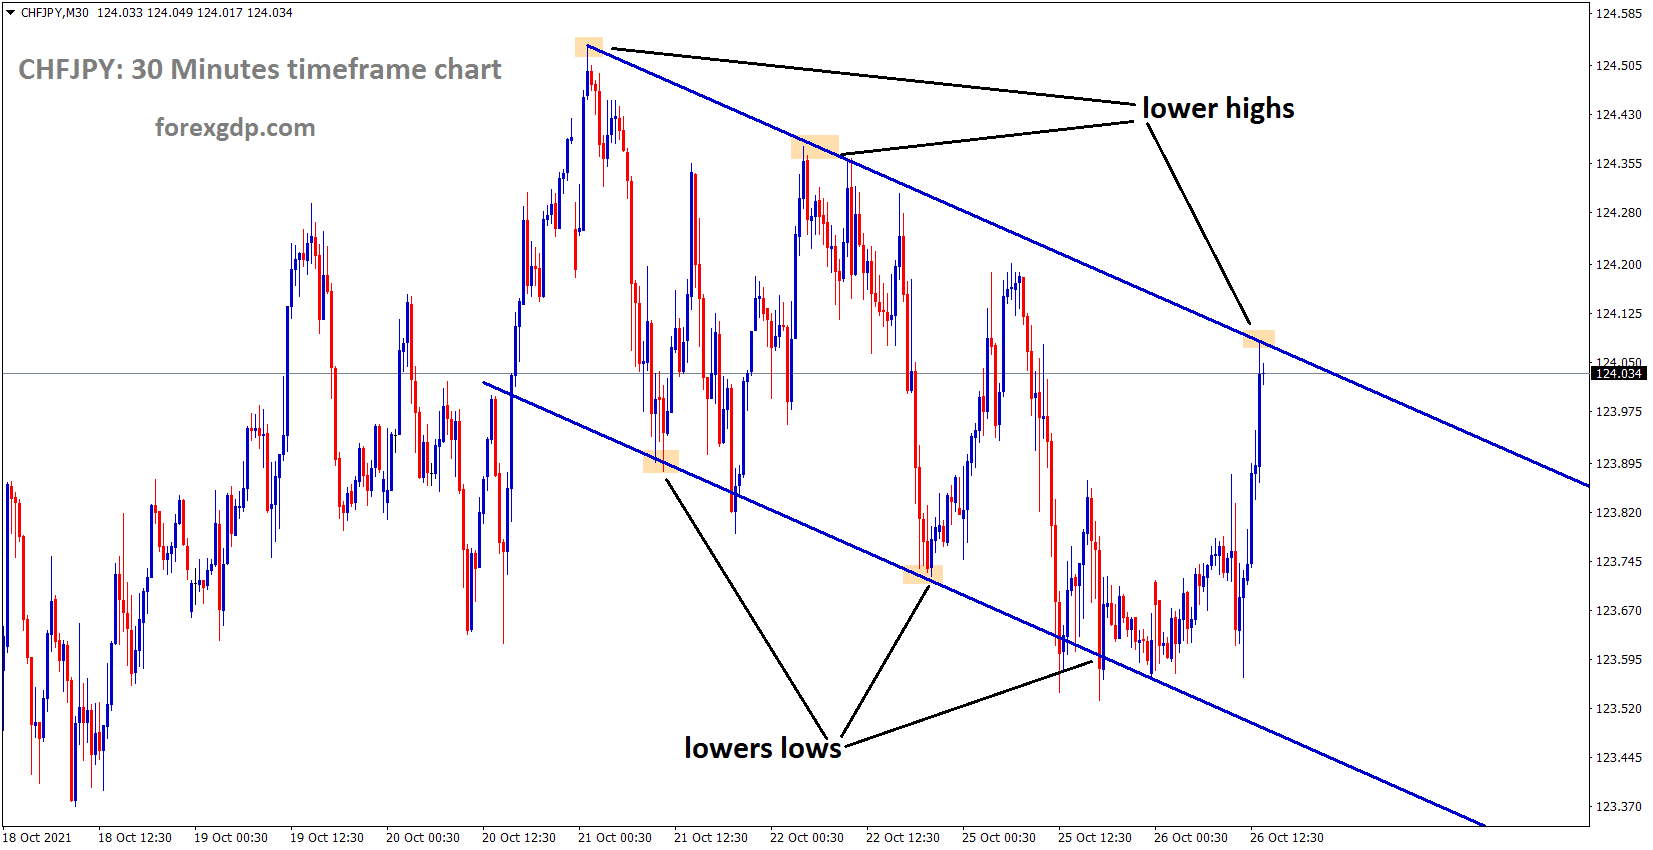 CHFJPY Moving in a Descending channel and market stands at lower high area of Descending channel